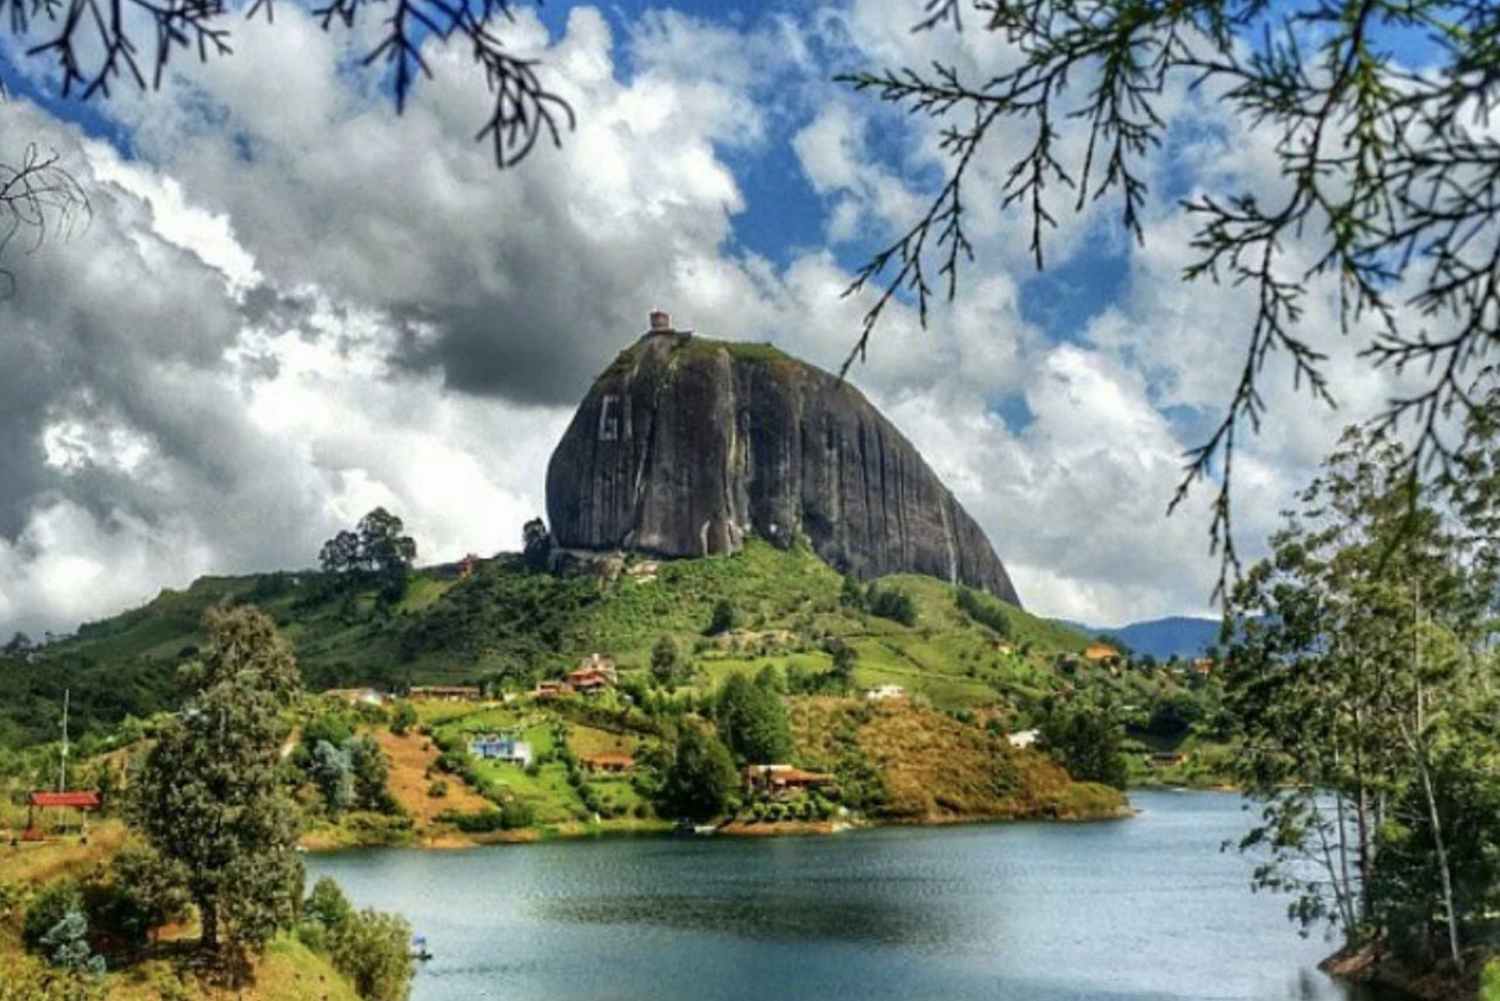 Guatapé, Piedra del Peñol and Boat Tour from Medellín